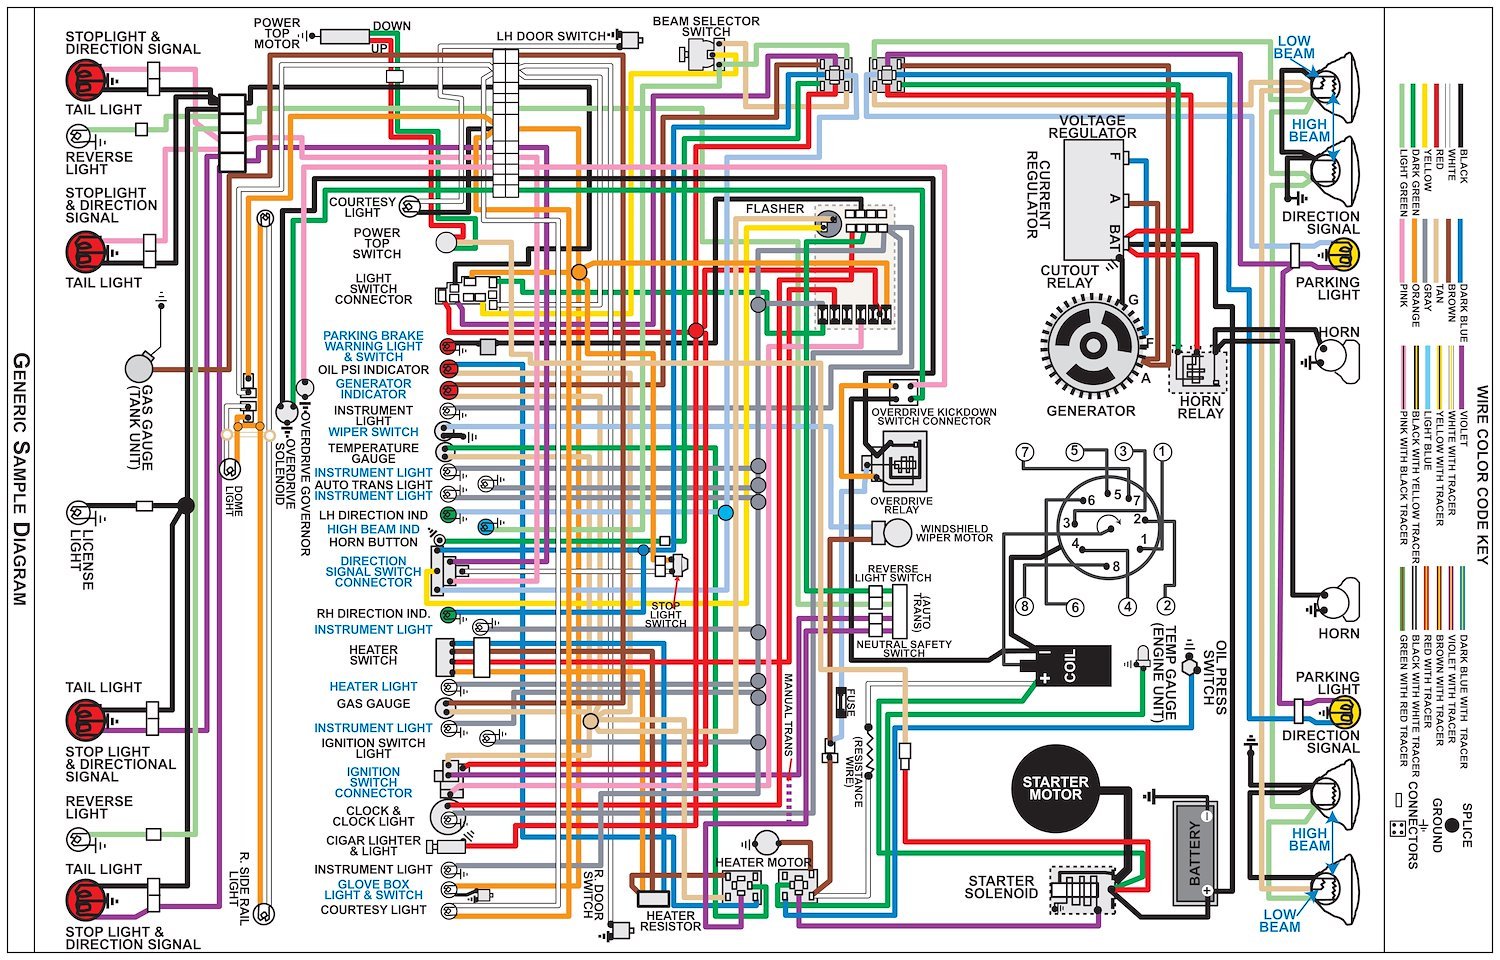 Wiring Diagram for 1971 Dodge Coronet, Charger with